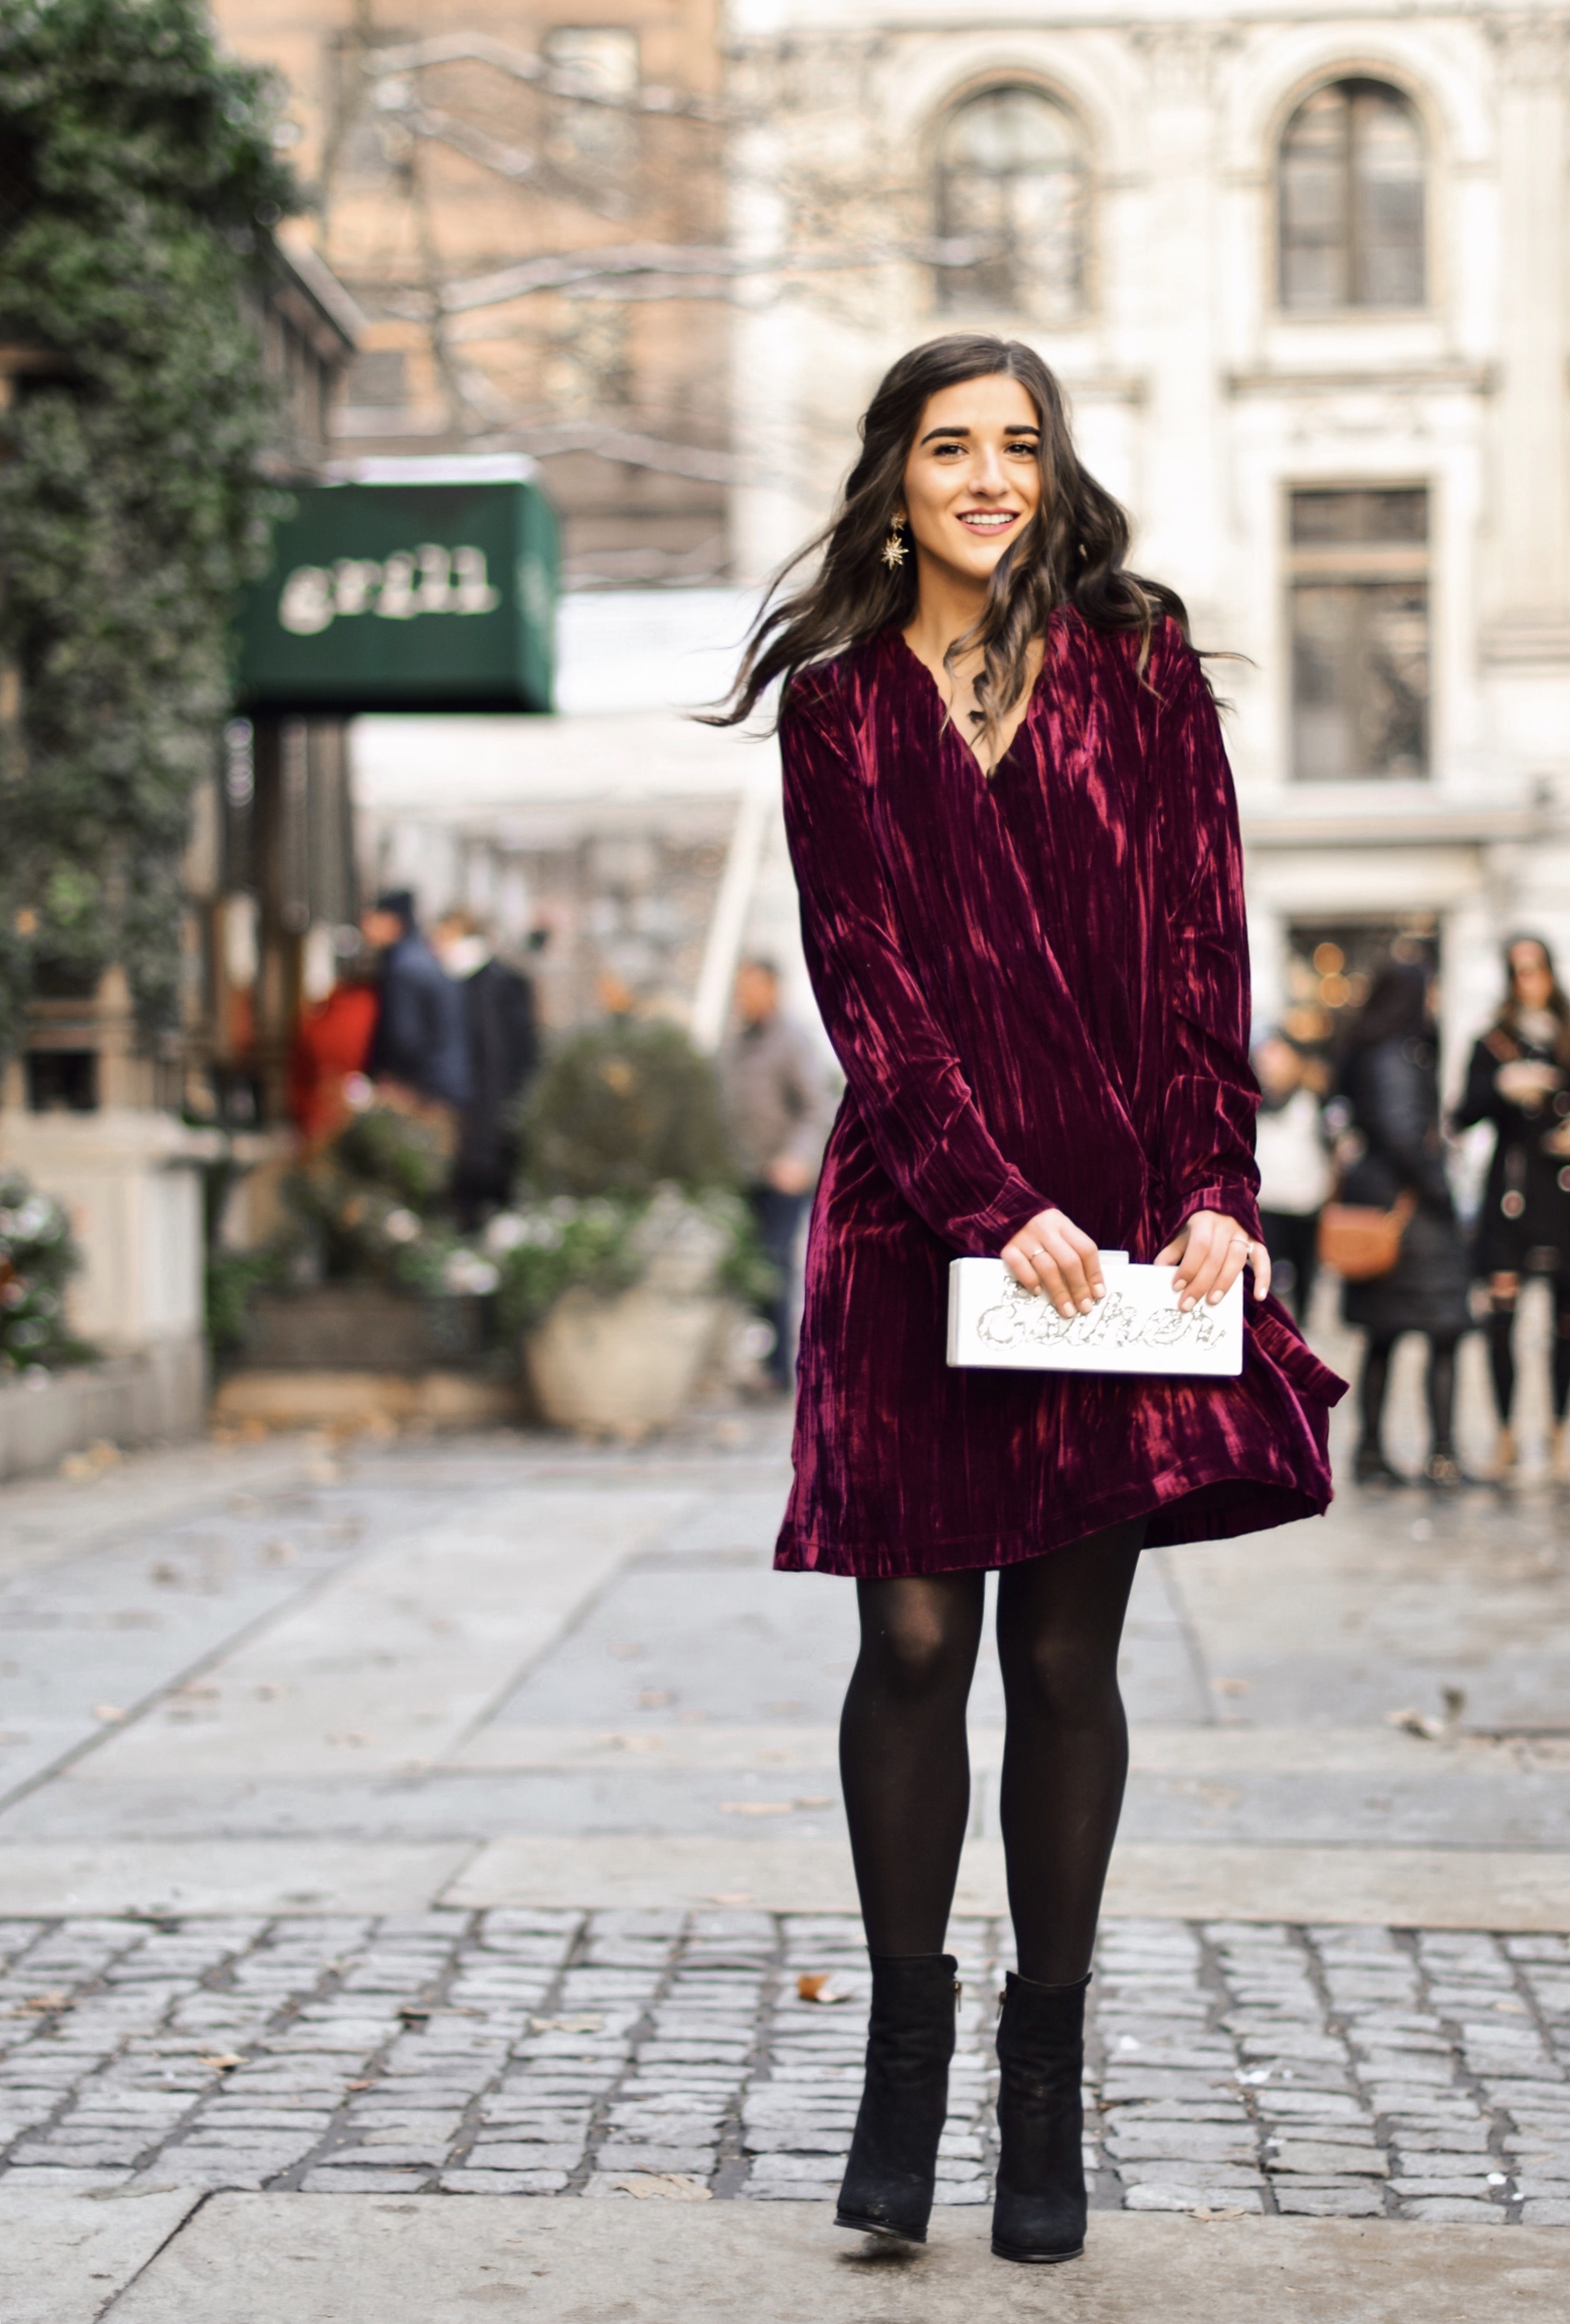 17 Tips On Building An Instagram Following Maroon Velvet Dress Black Booties Esther Santer Fashion Blog NYC Street Style Blogger Outfit OOTD Trendy Zara Online Shopping Winter Monogram Box Bag Clutch M4D3 Shoes Wavy Hair Hue Tights Wear Classic Simple.jpg